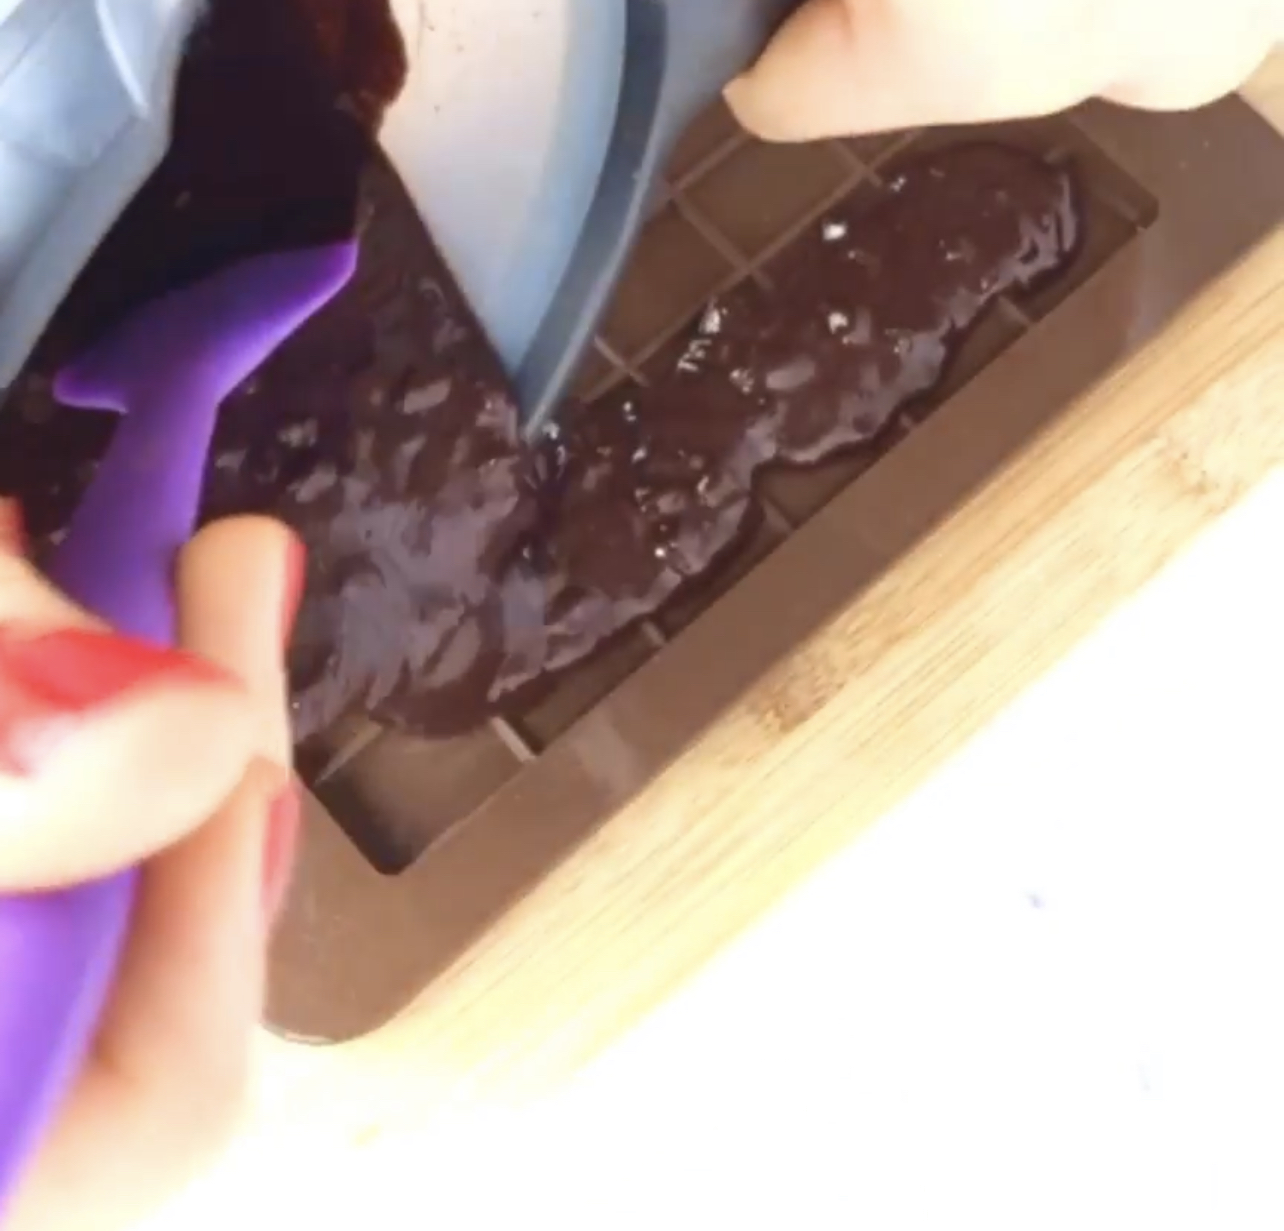 Spreading the melted chocolate into a chocolate mold.